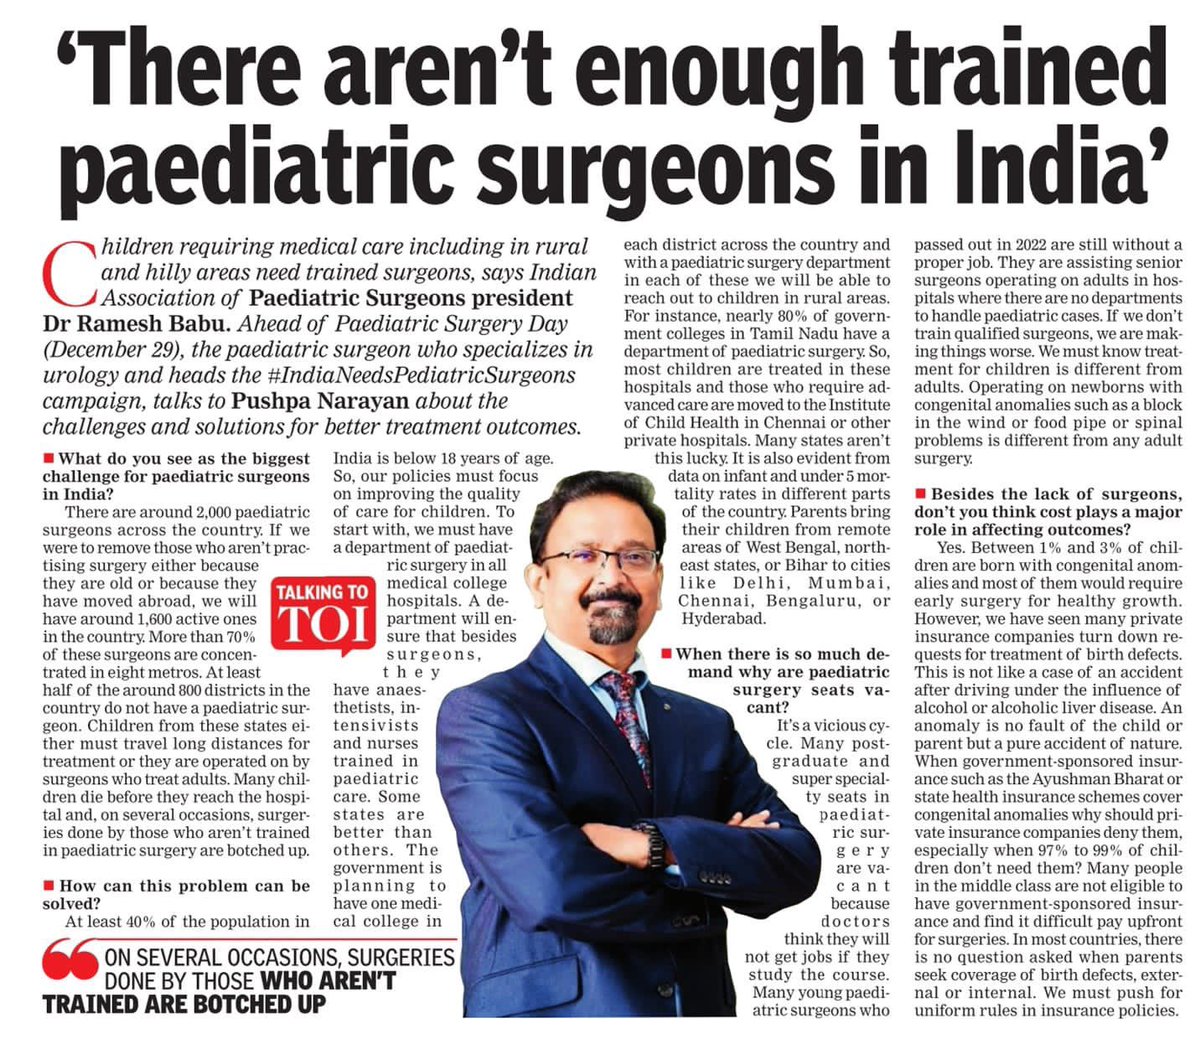 @IAPSIndia President’s interview in @TOIIndiaNews. @drrameshbabu1 Sums up the current situation of Pediatric Surgery in India. 

#IndiaNeedsPediatricSurgeons